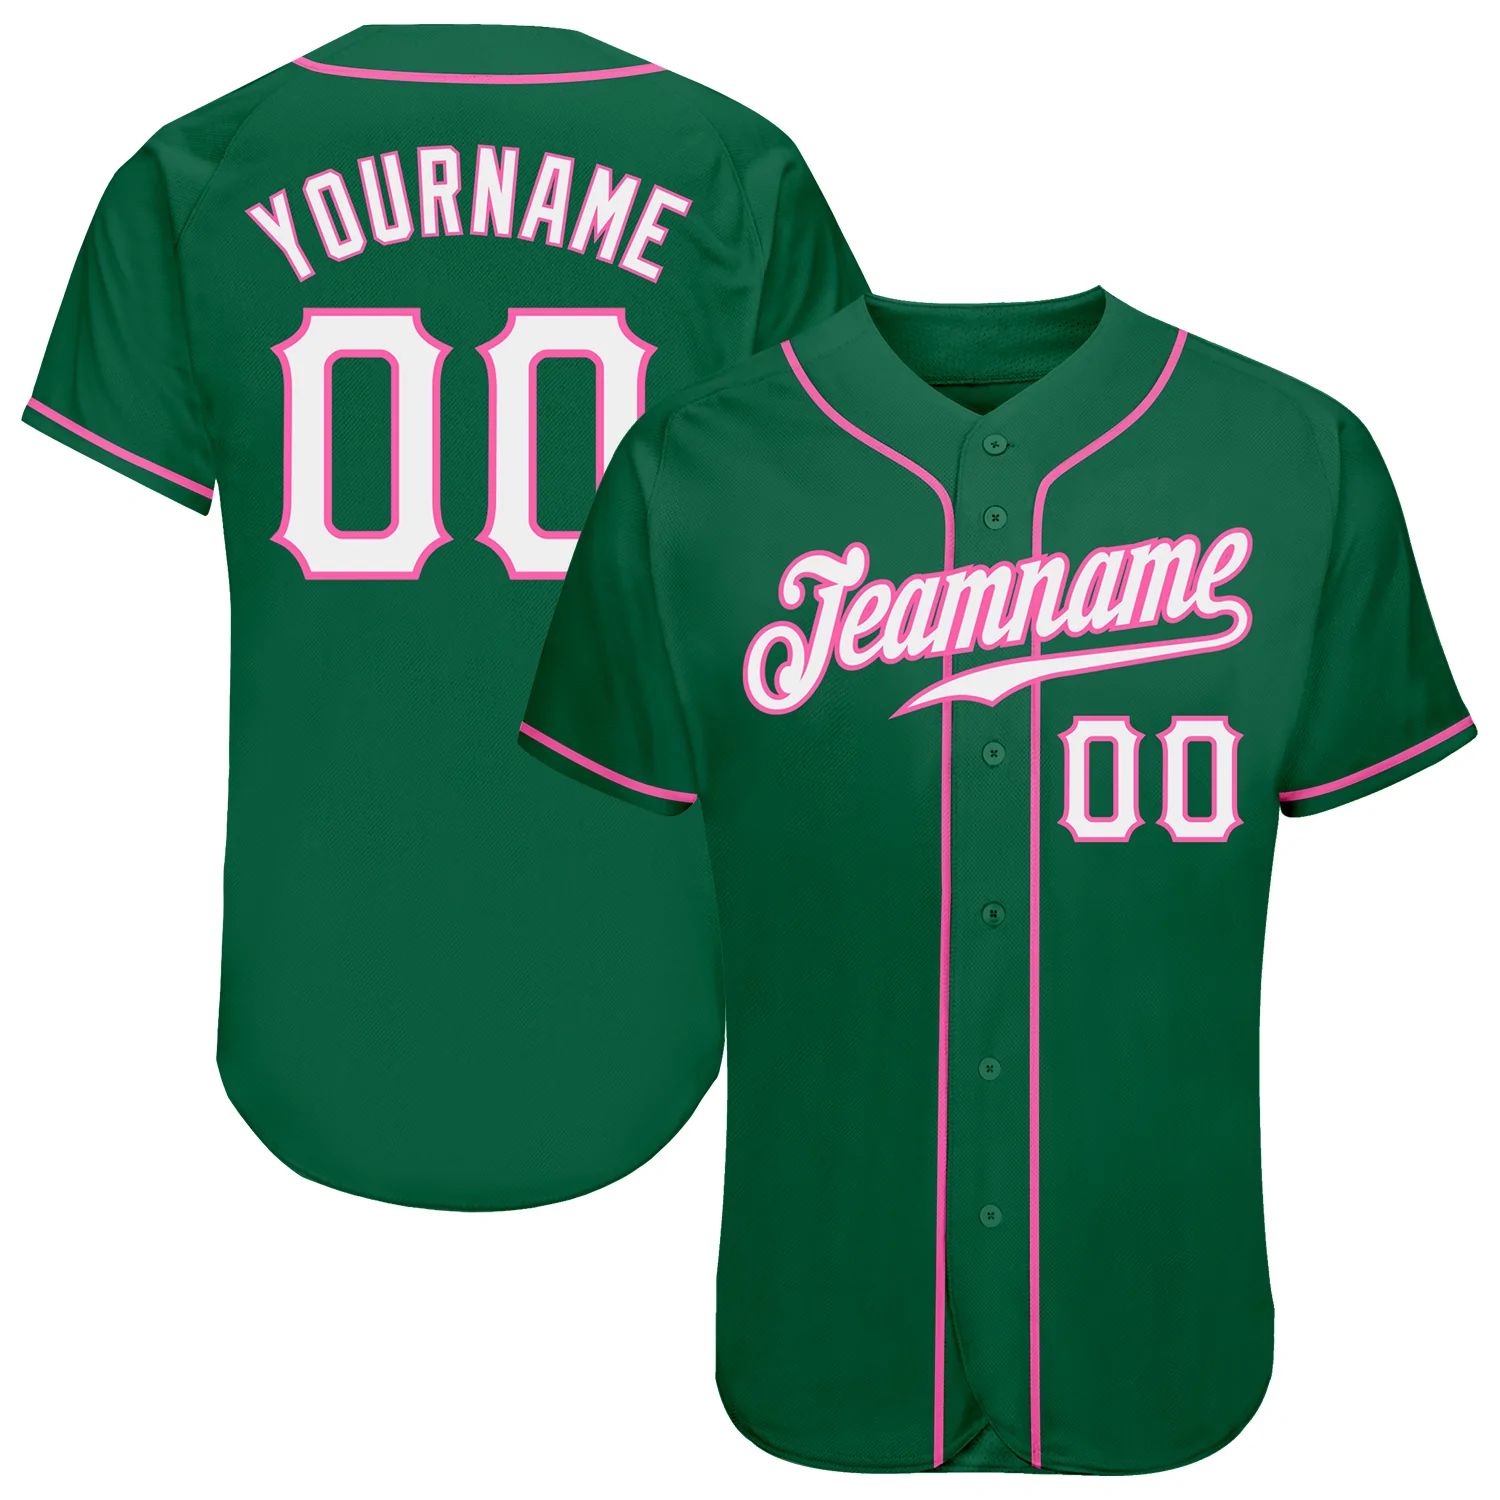 build-pink-kelly-green-baseball-white-jersey-authentic-kellygreen0083-online-1.jpg